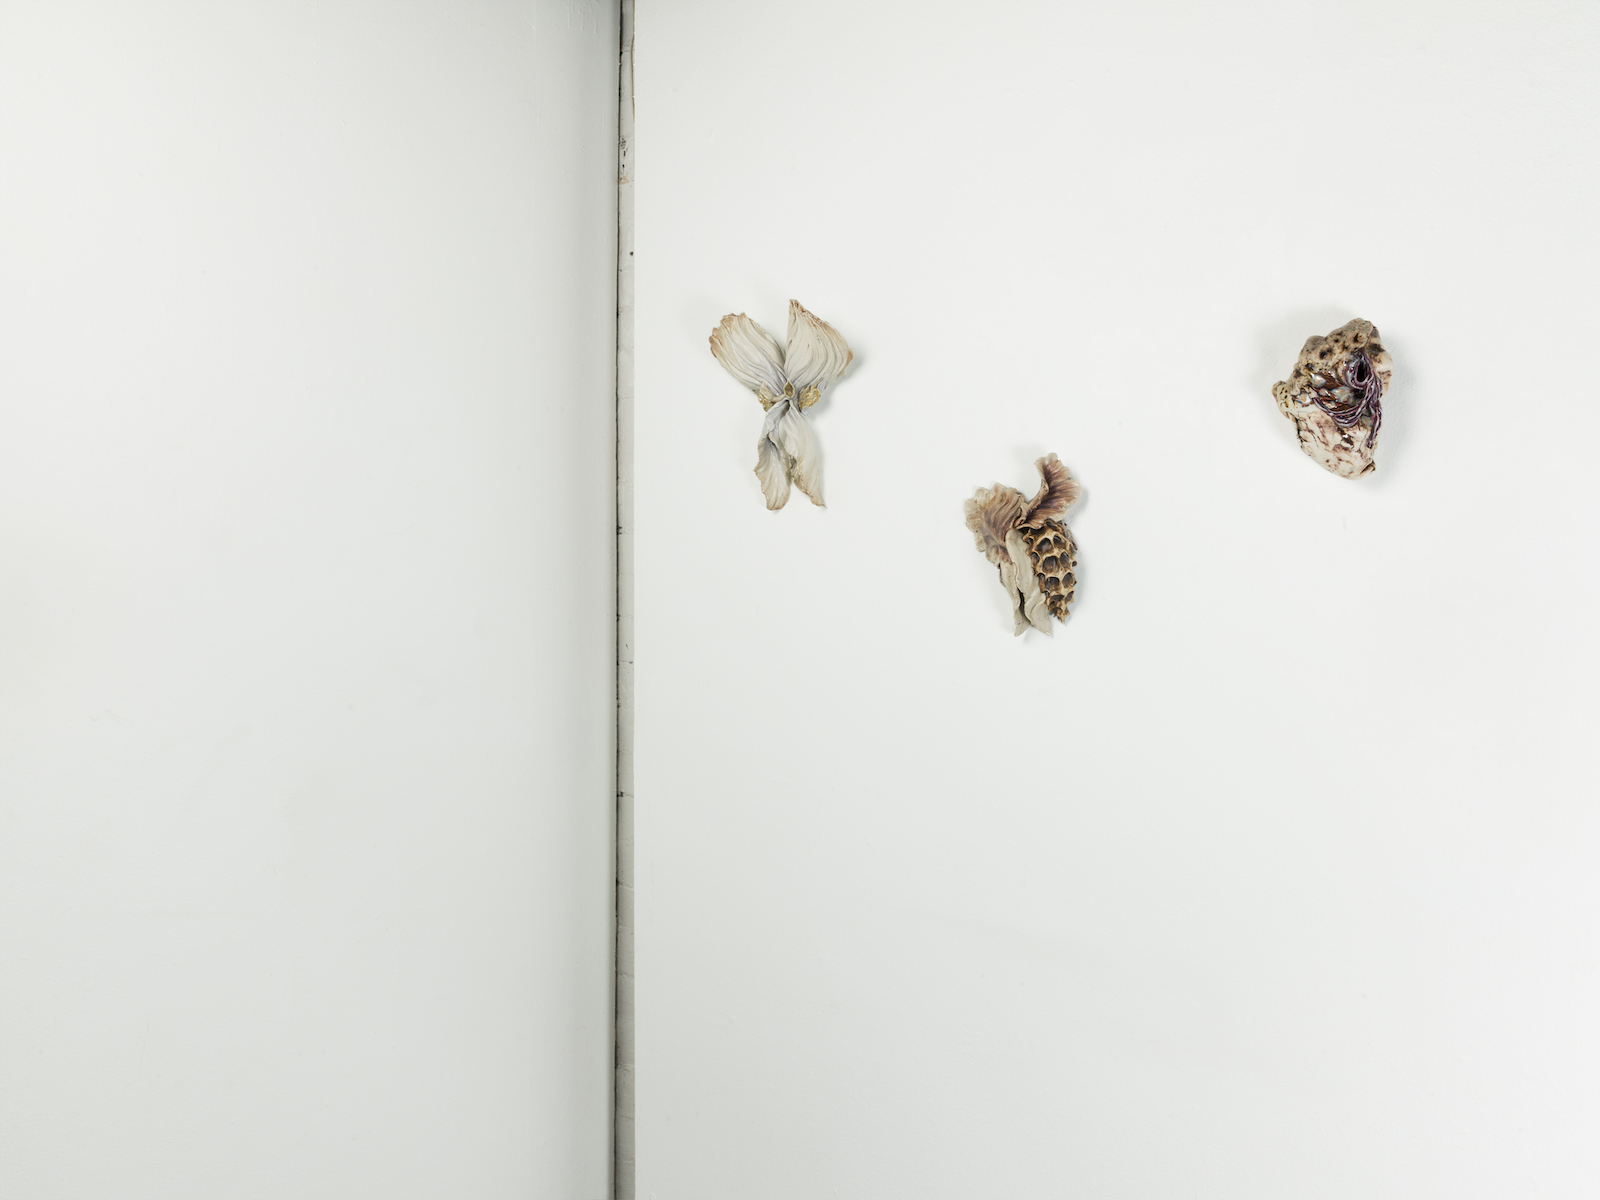 Installation view of Michelle Laxalt, "the split of our being" in whitespec at whitespace gallery in Atlanta.